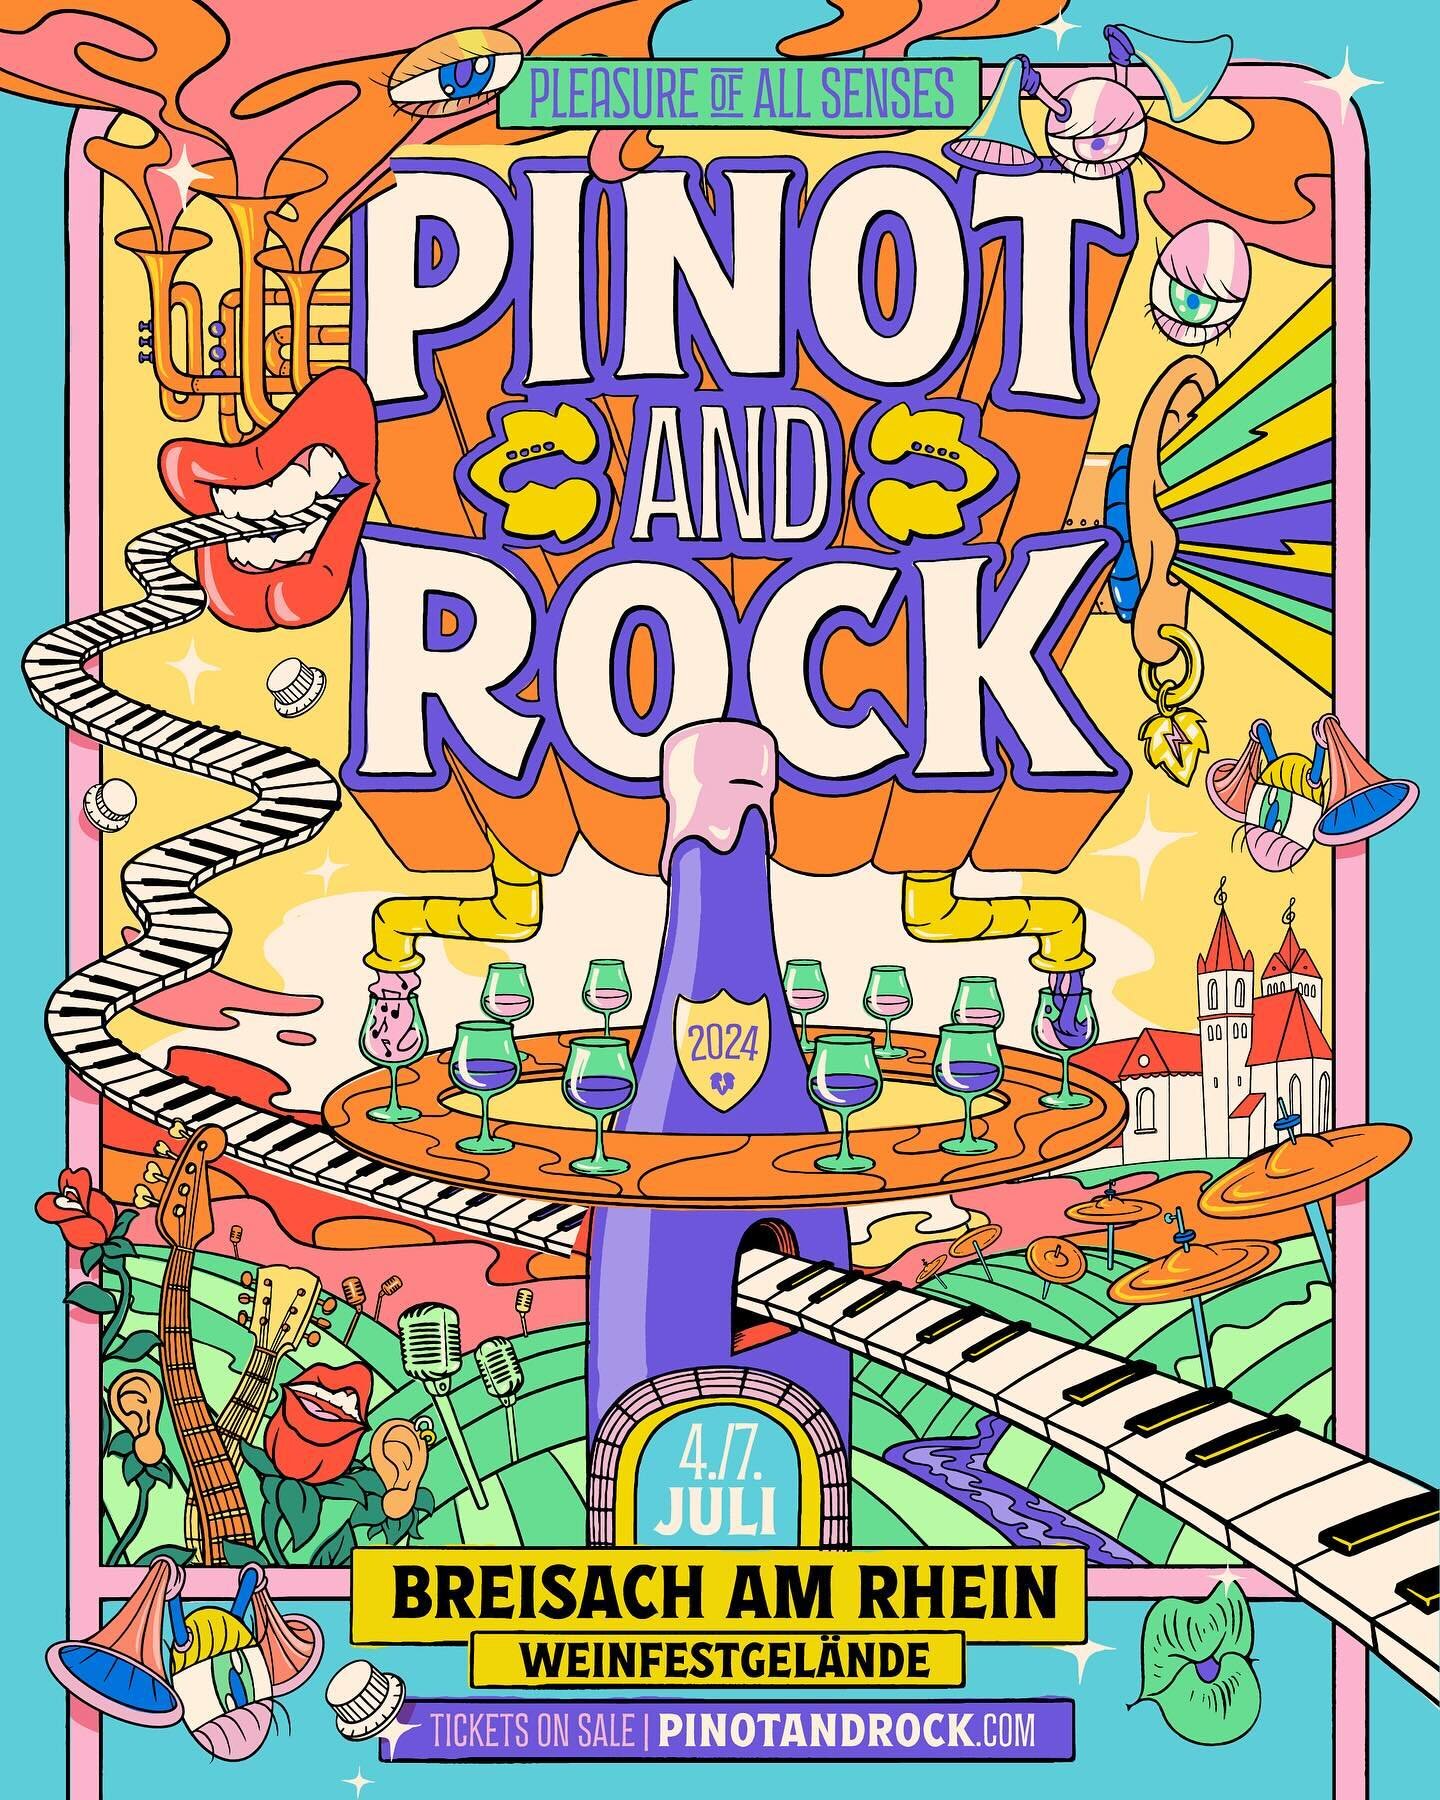 🍷🤘🏽⚡️ Enjoy a preview of the key visual that we designed for Pinot and Rock @pinotandrock, a festival for all the senses that will be celebrated during July in Germany. More coming soon!

Lead agency: The Gram
ECD - Garth Gericke 
Design and illus